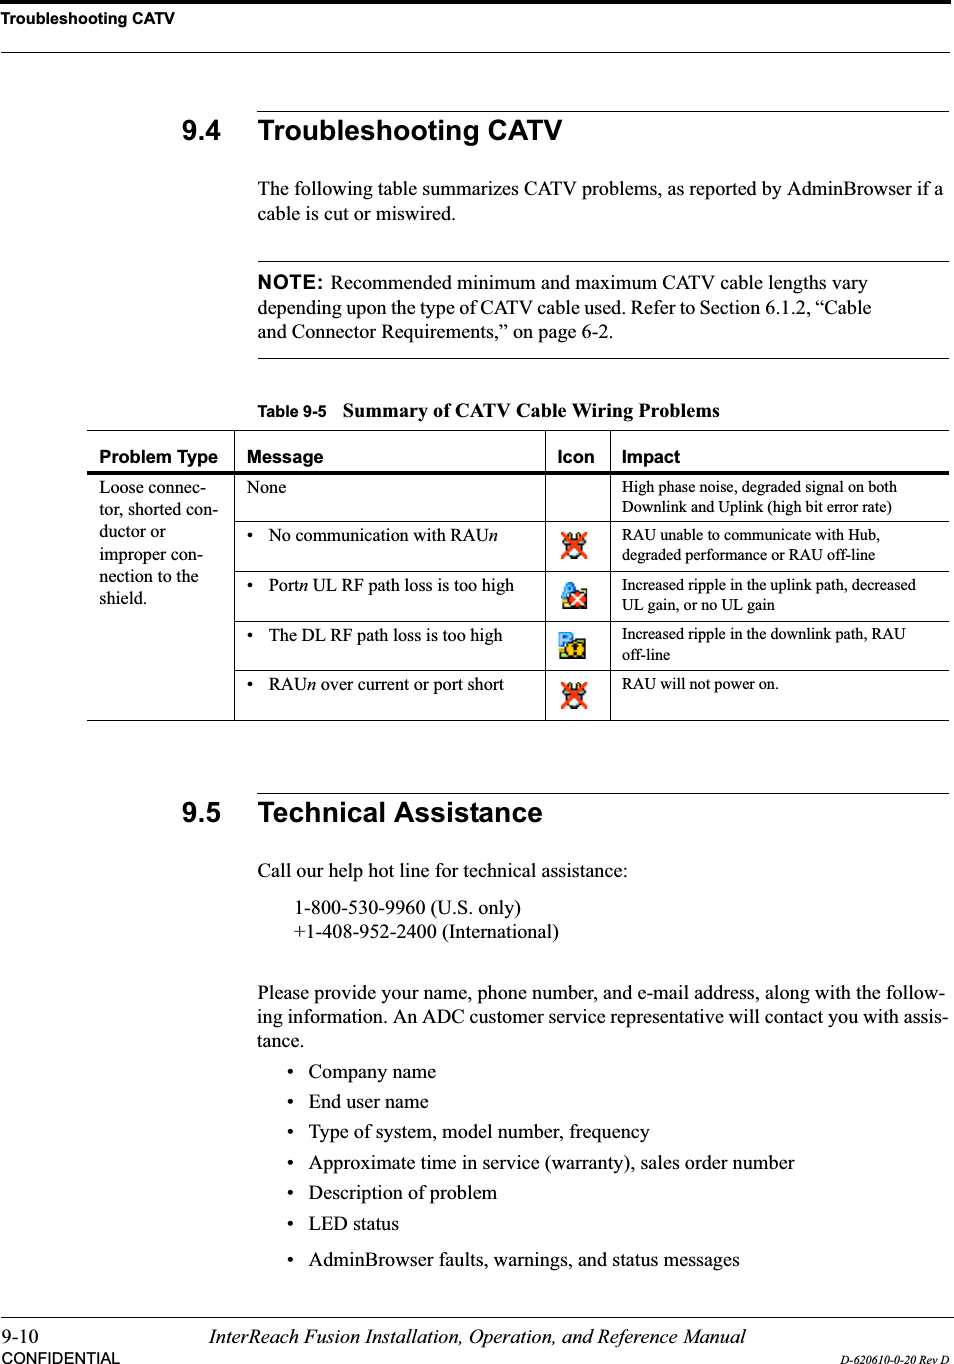 Troubleshooting CATV9-10 InterReach Fusion Installation, Operation, and Reference ManualCONFIDENTIAL D-620610-0-20 Rev D9.4 Troubleshooting CATVThe following table summarizes CATV problems, as reported by AdminBrowser if a cable is cut or miswired.NOTE: Recommended minimum and maximum CATV cable lengths vary depending upon the type of CATV cable used. Refer to Section 6.1.2, “Cable and Connector Requirements,” on page 6-2.9.5 Technical AssistanceCall our help hot line for technical assistance:1-800-530-9960 (U.S. only)+1-408-952-2400 (International)Please provide your name, phone number, and e-mail address, along with the follow-ing information. An ADC customer service representative will contact you with assis-tance.• Company name• End user name• Type of system, model number, frequency• Approximate time in service (warranty), sales order number• Description of problem• LED status• AdminBrowser faults, warnings, and status messagesTable 9-5 Summary of CATV Cable Wiring ProblemsProblem Type Message Icon ImpactLoose connec-tor, shorted con-ductor or improper con-nection to the shield.None High phase noise, degraded signal on both Downlink and Uplink (high bit error rate)• No communication with RAUn  RAU unable to communicate with Hub, degraded performance or RAU off-line• Portn UL RF path loss is too high Increased ripple in the uplink path, decreased UL gain, or no UL gain• The DL RF path loss is too high Increased ripple in the downlink path, RAU off-line•RAUn over current or port short RAU will not power on.